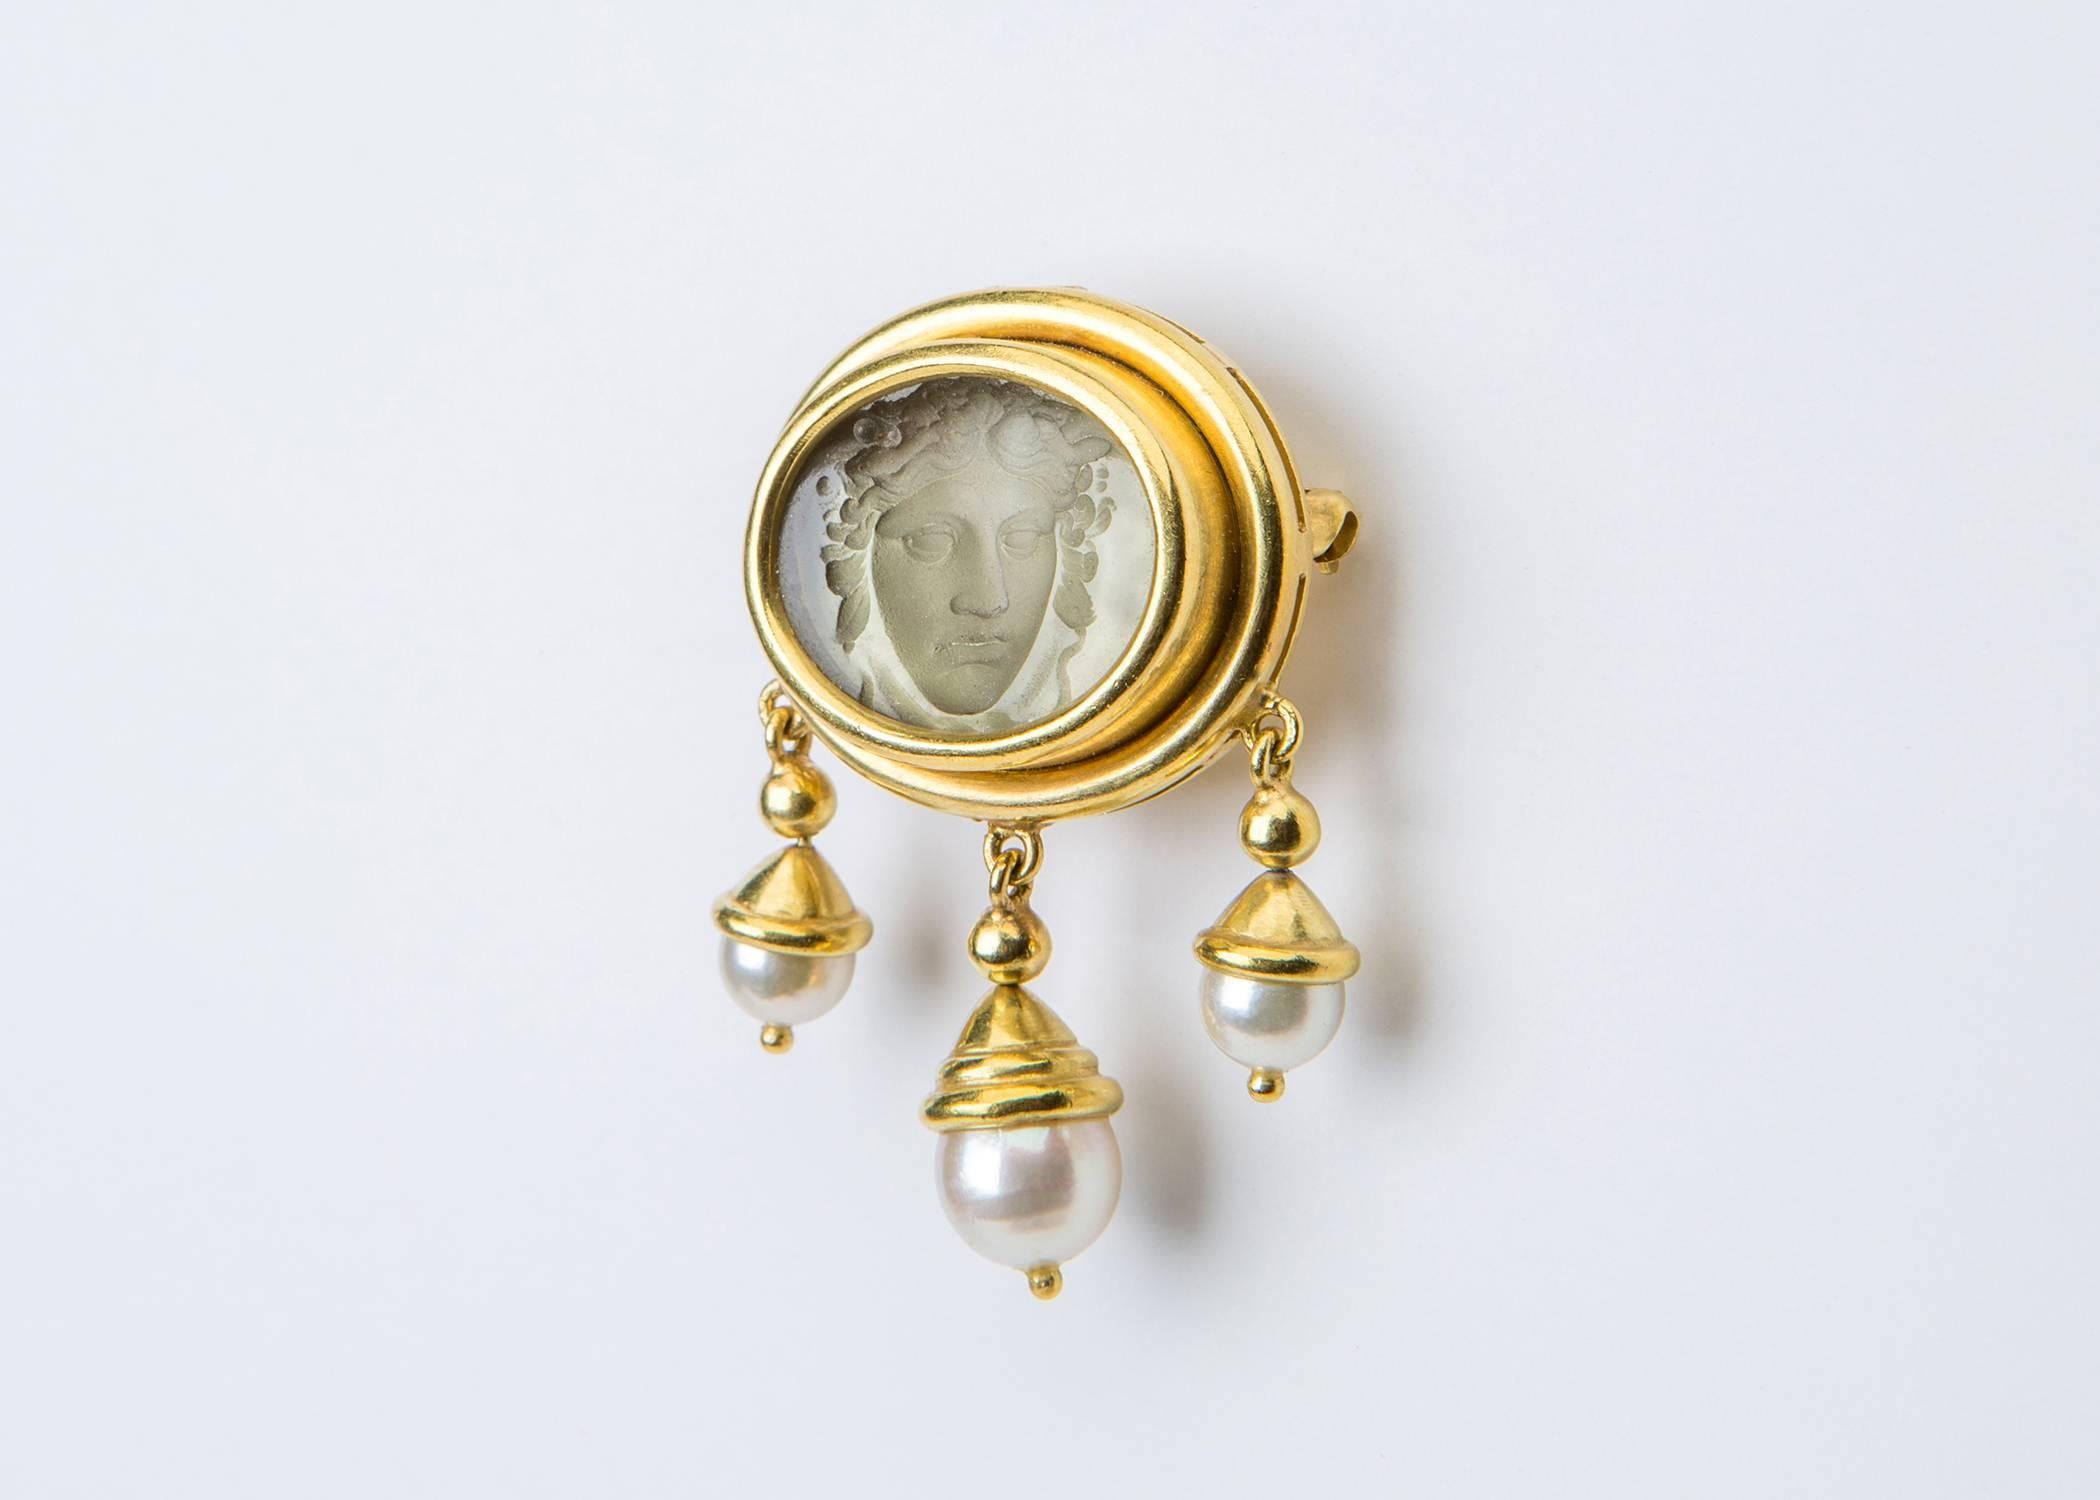 A dramatic Venetian glass intaglio is framed with an elegant double bezel and finished with three beautiful cultured pearls. Wear this as a pin or pendant. 1 1/8 inches across by 1 5/8 inches in length. Pure Elizabeth Locke style and quality.